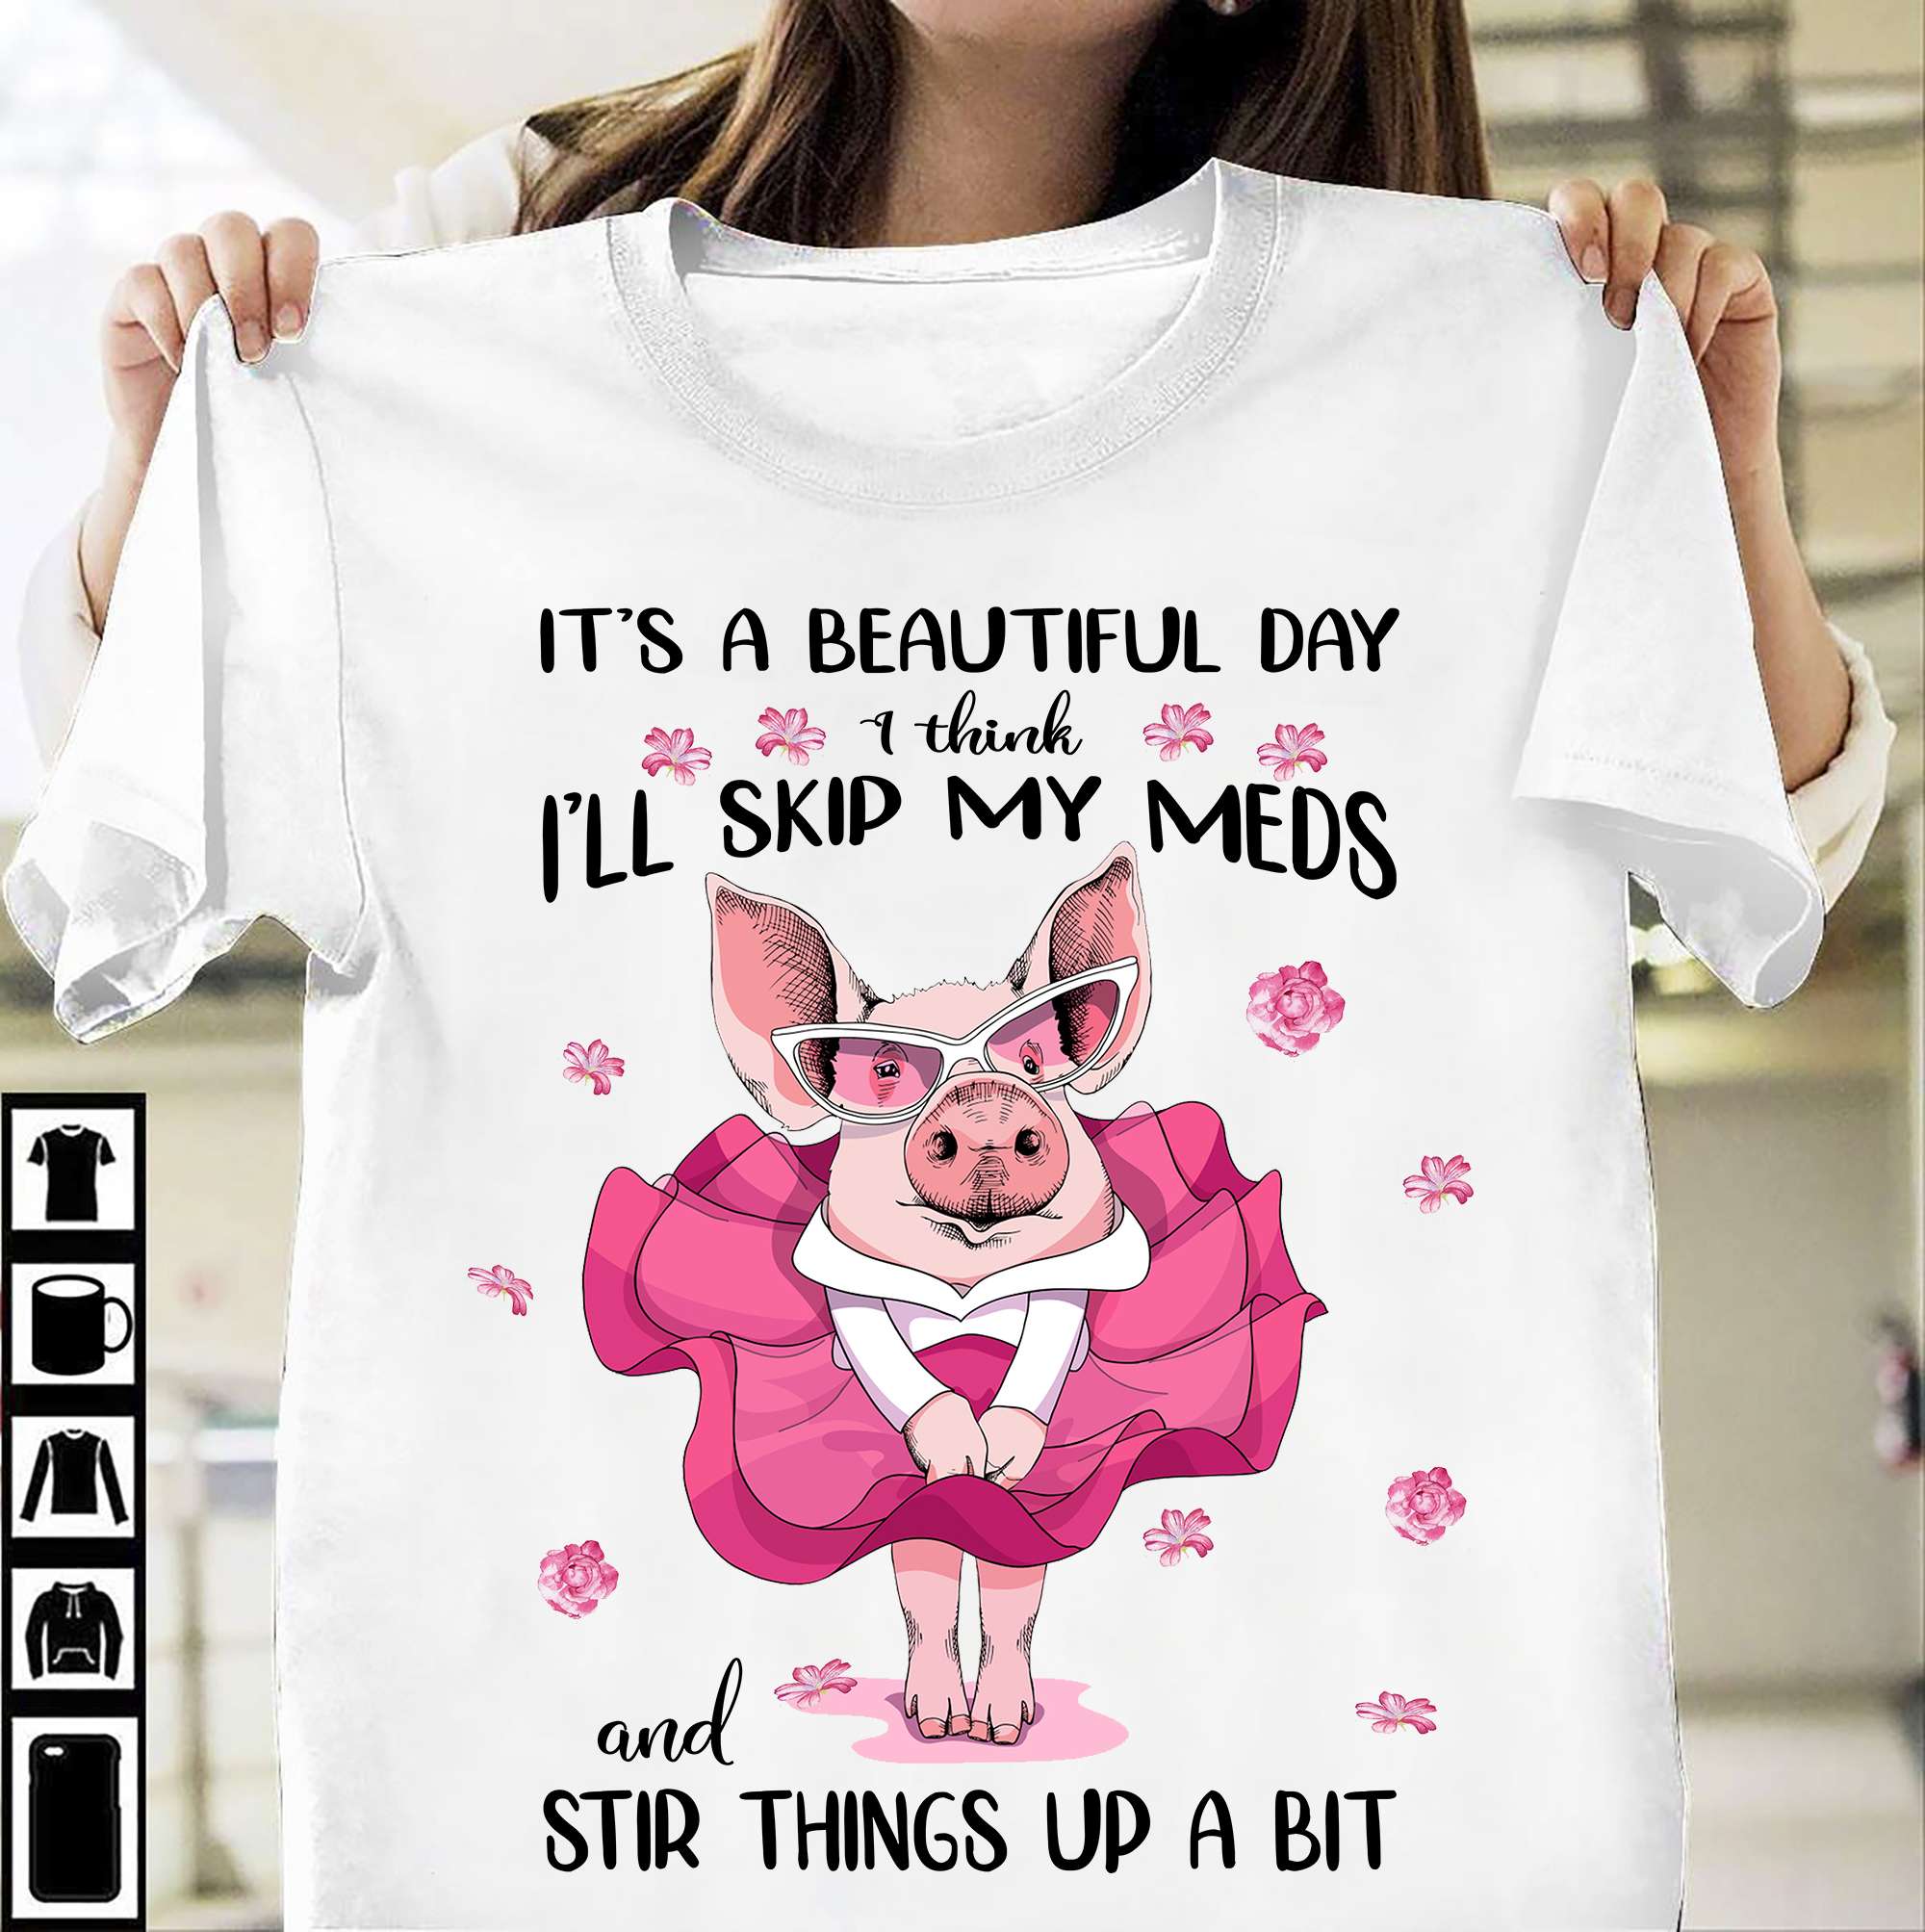 Pig Girl - It's a beautiful day i think i'll skip my meds and stir things up a bit